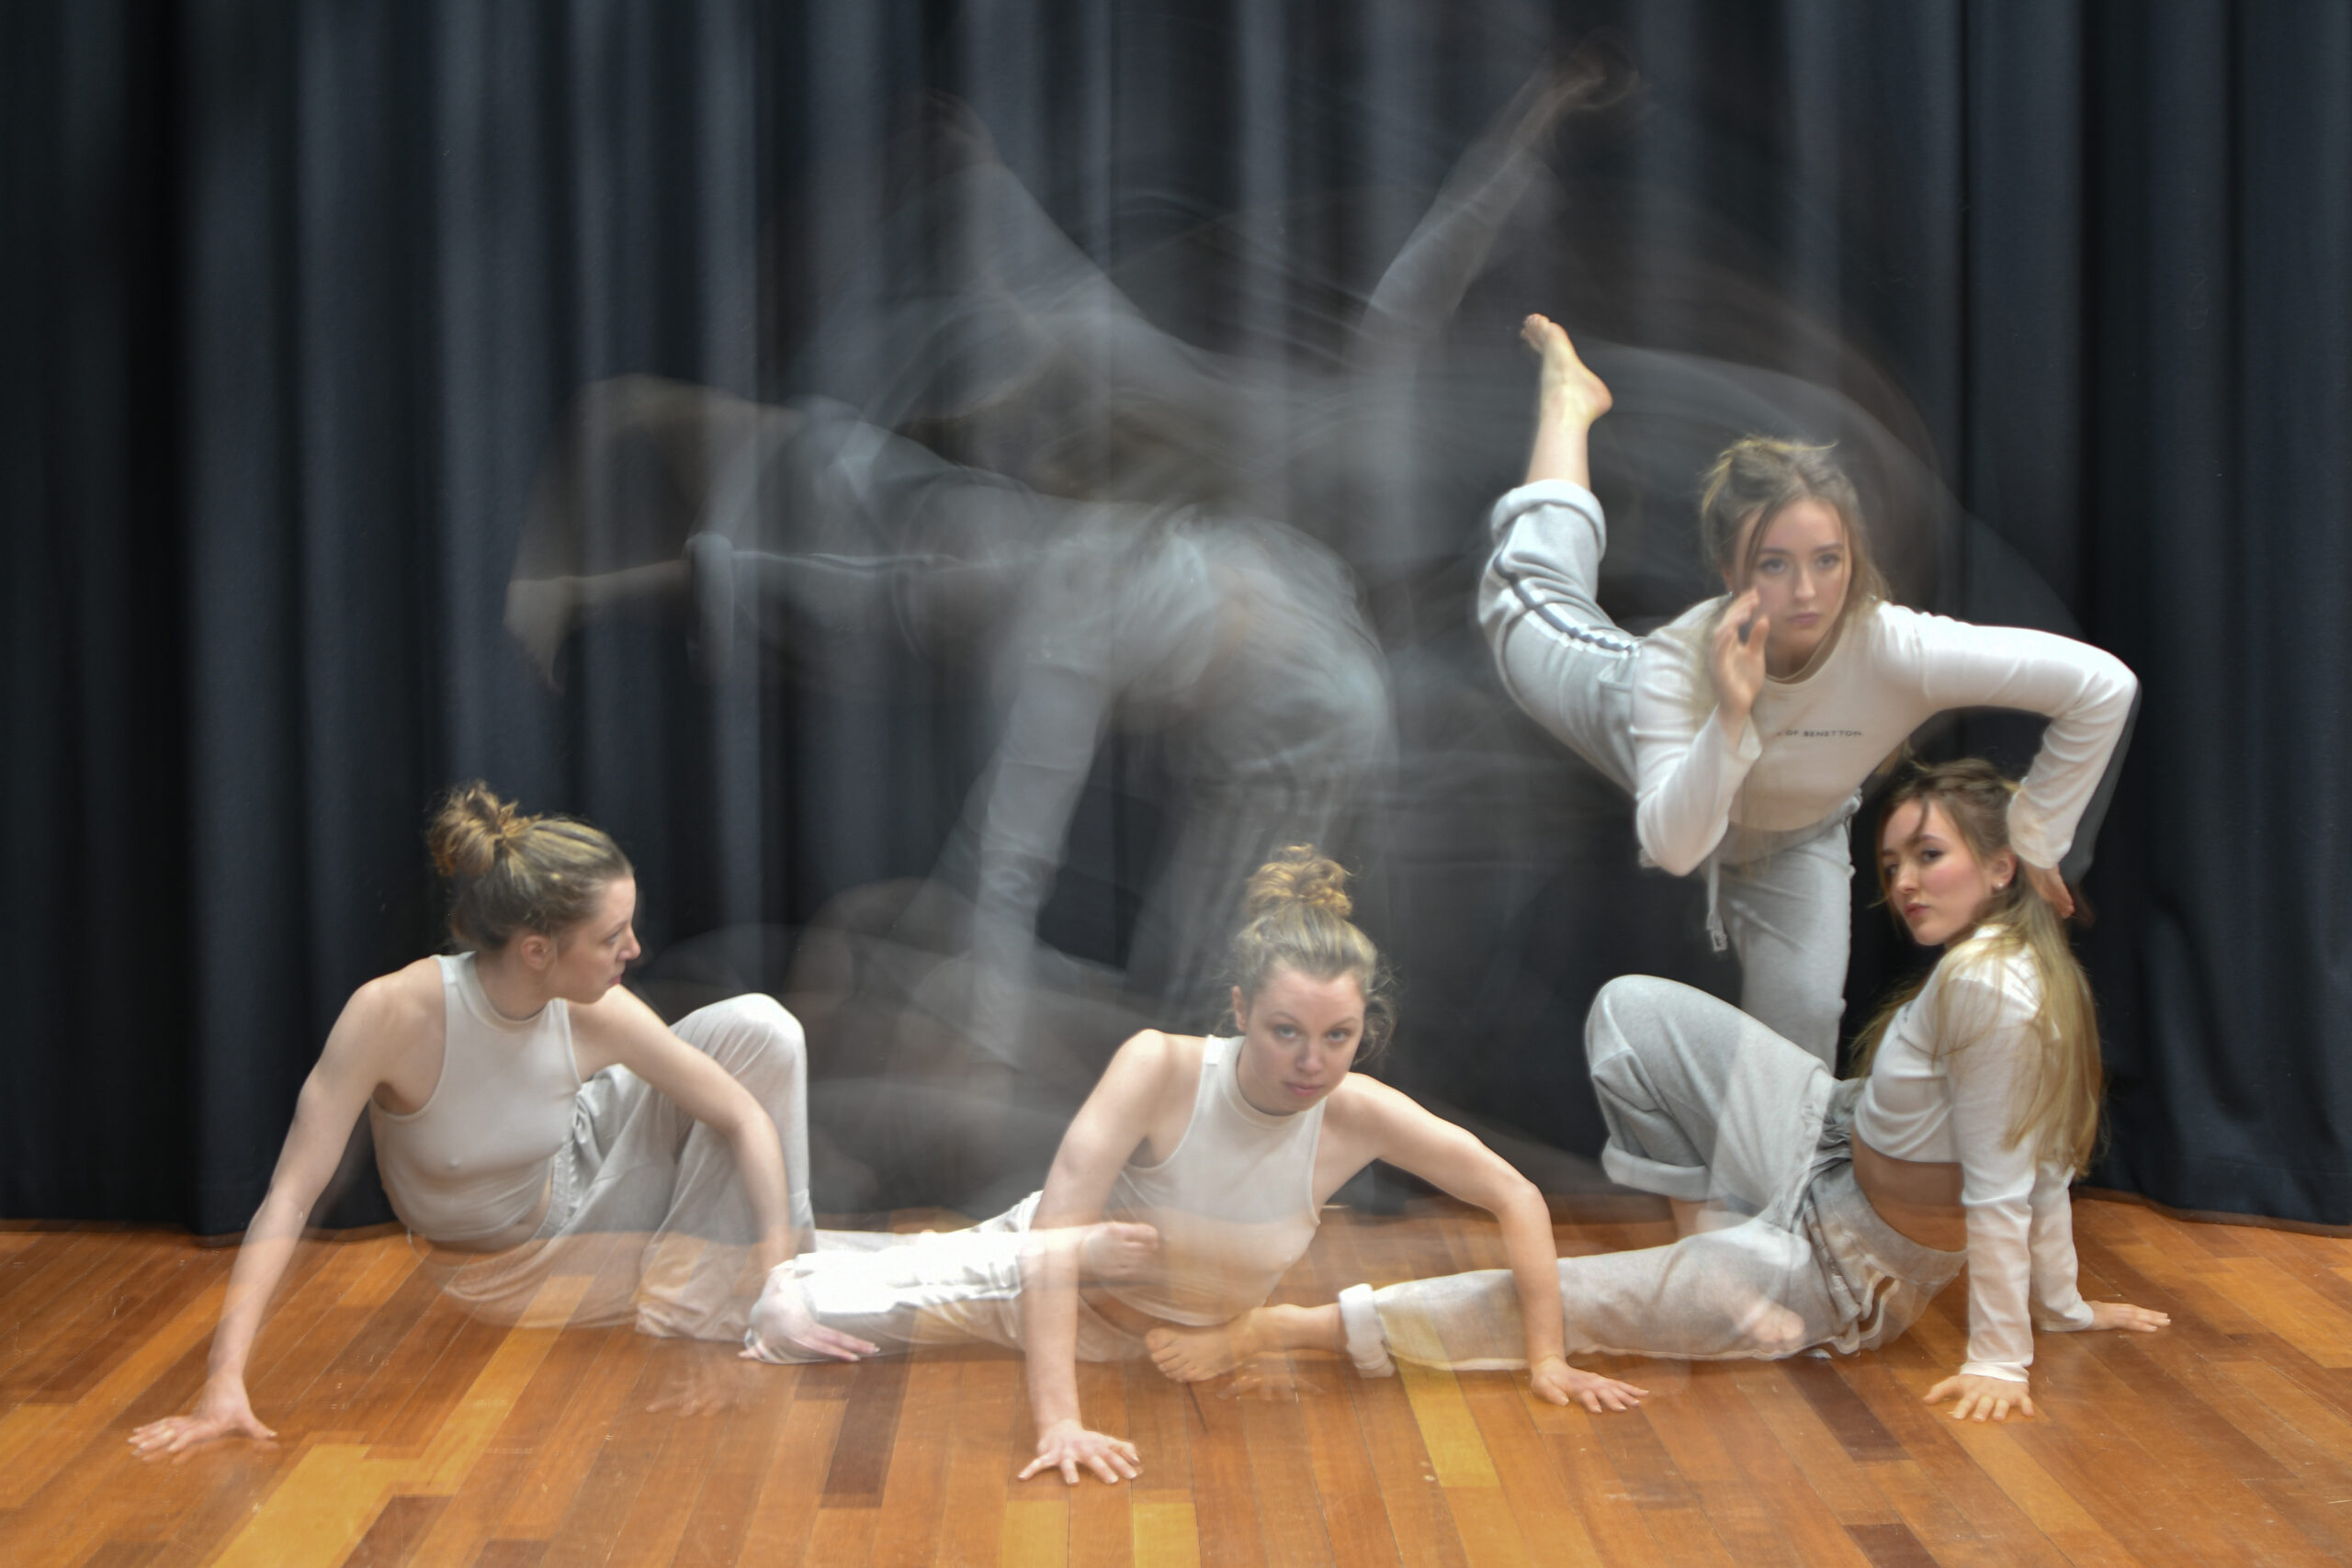 Dancing Models with Motion Blur